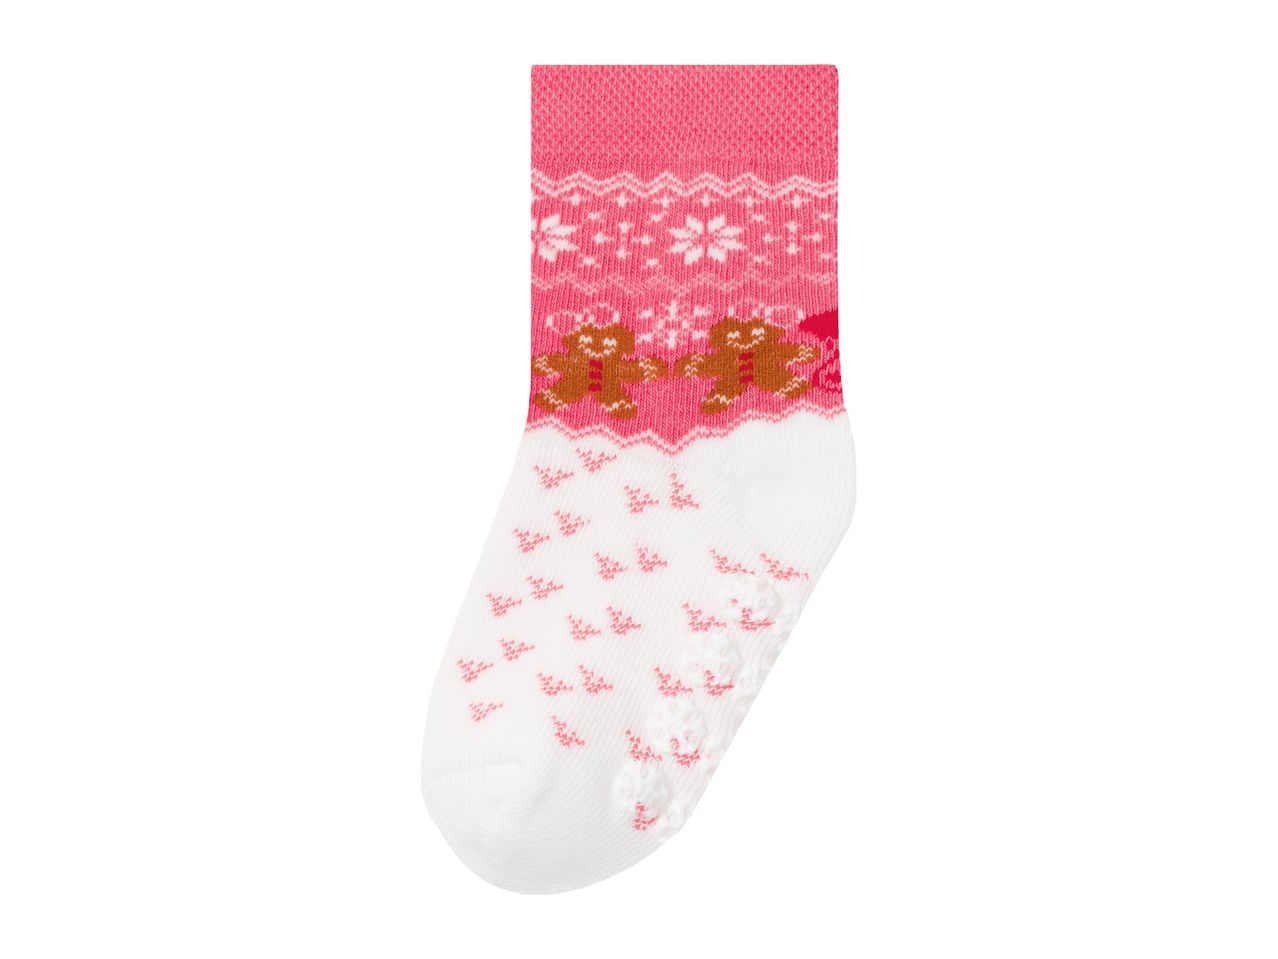 Go to full screen view: Lupilu Younger Kids’ Christmas Thermal Socks - 2 pairs - Image 5